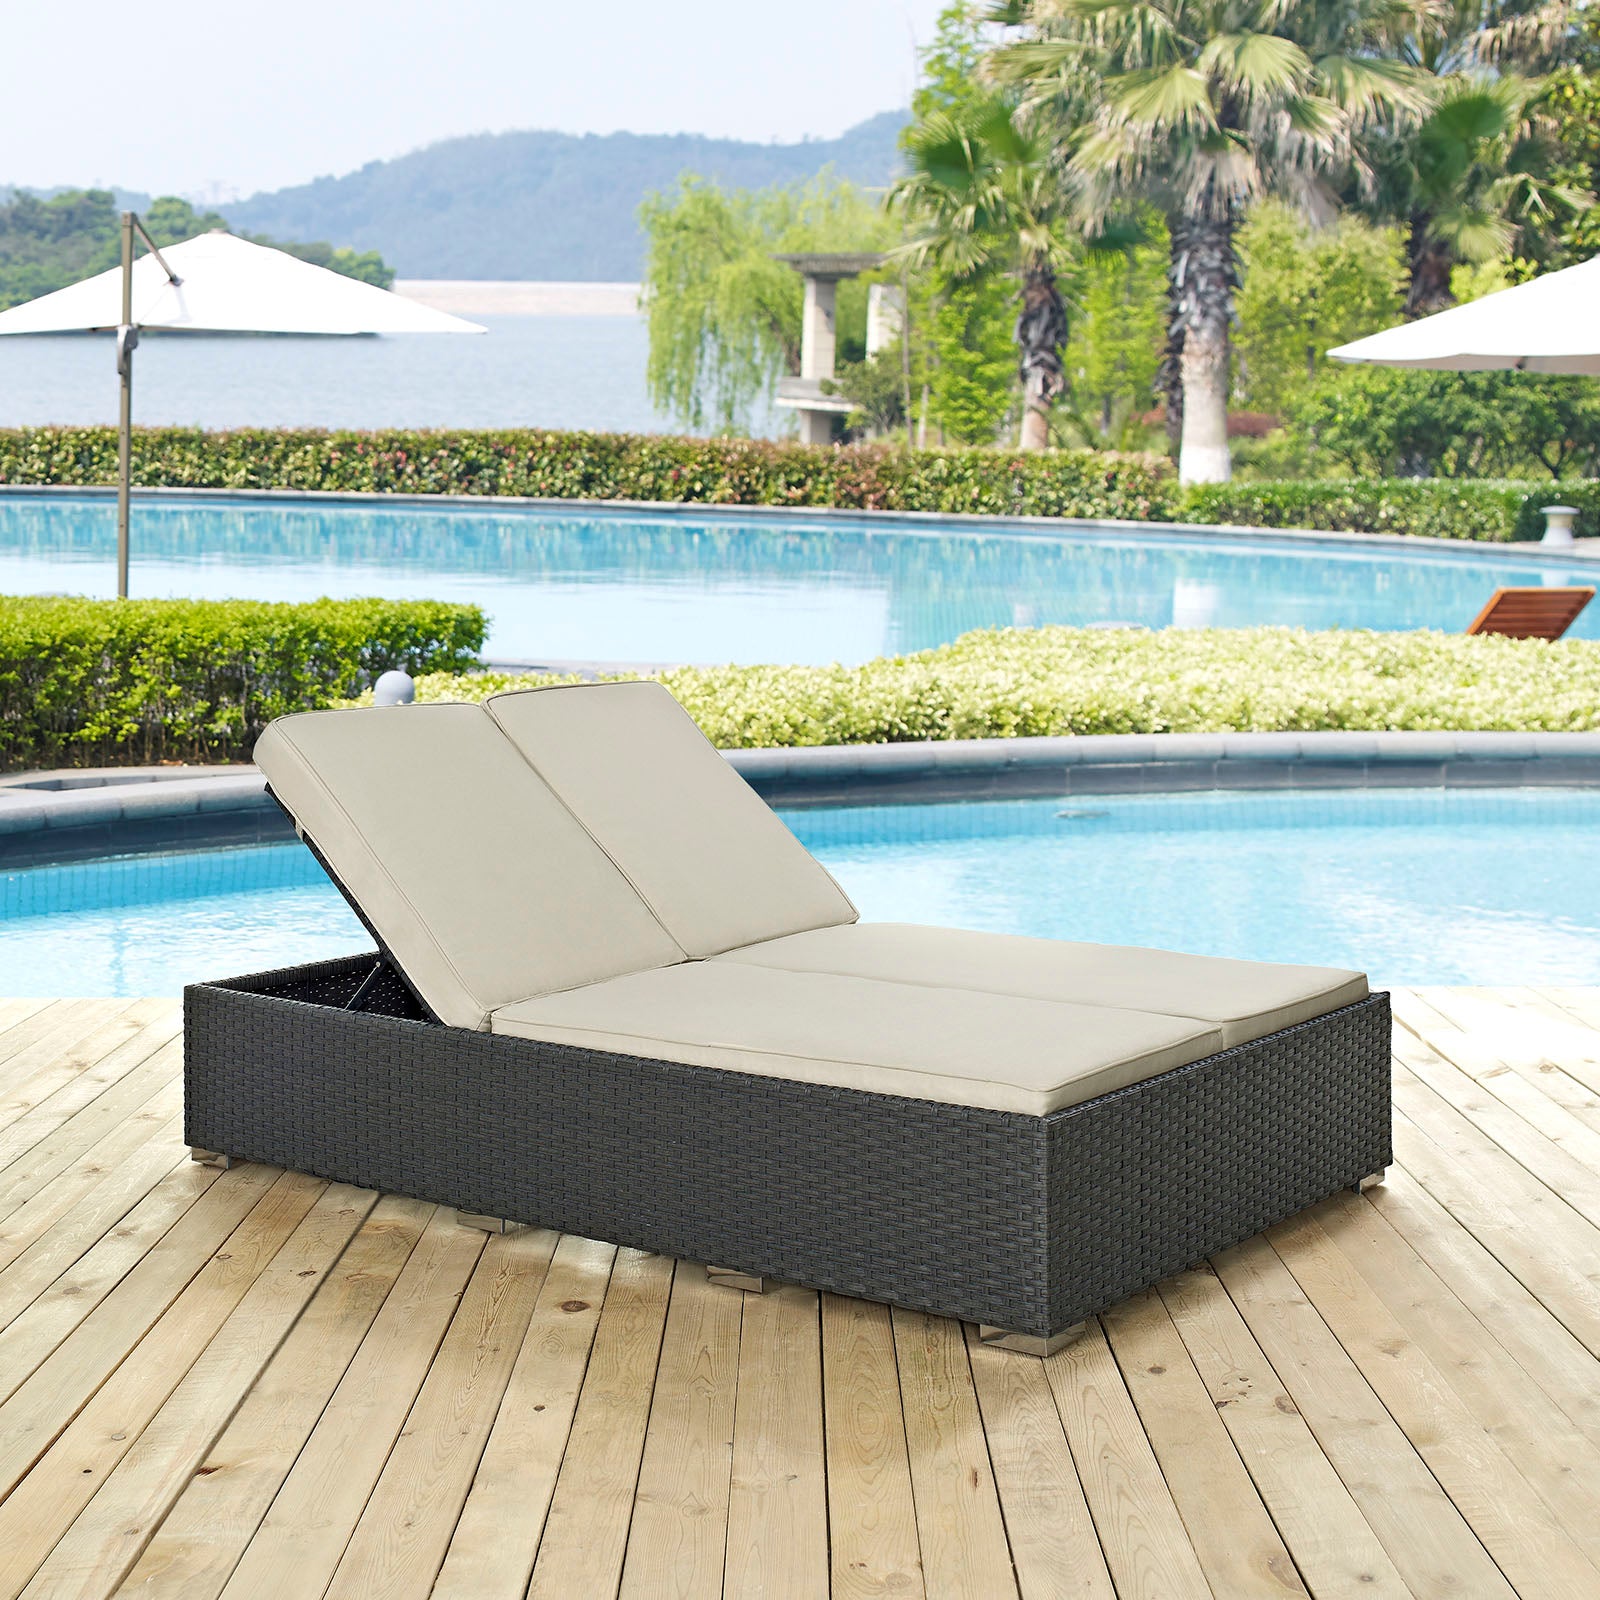 Sojourn Outdoor Patio Sunbrella Double Chaise Chocolate Beige